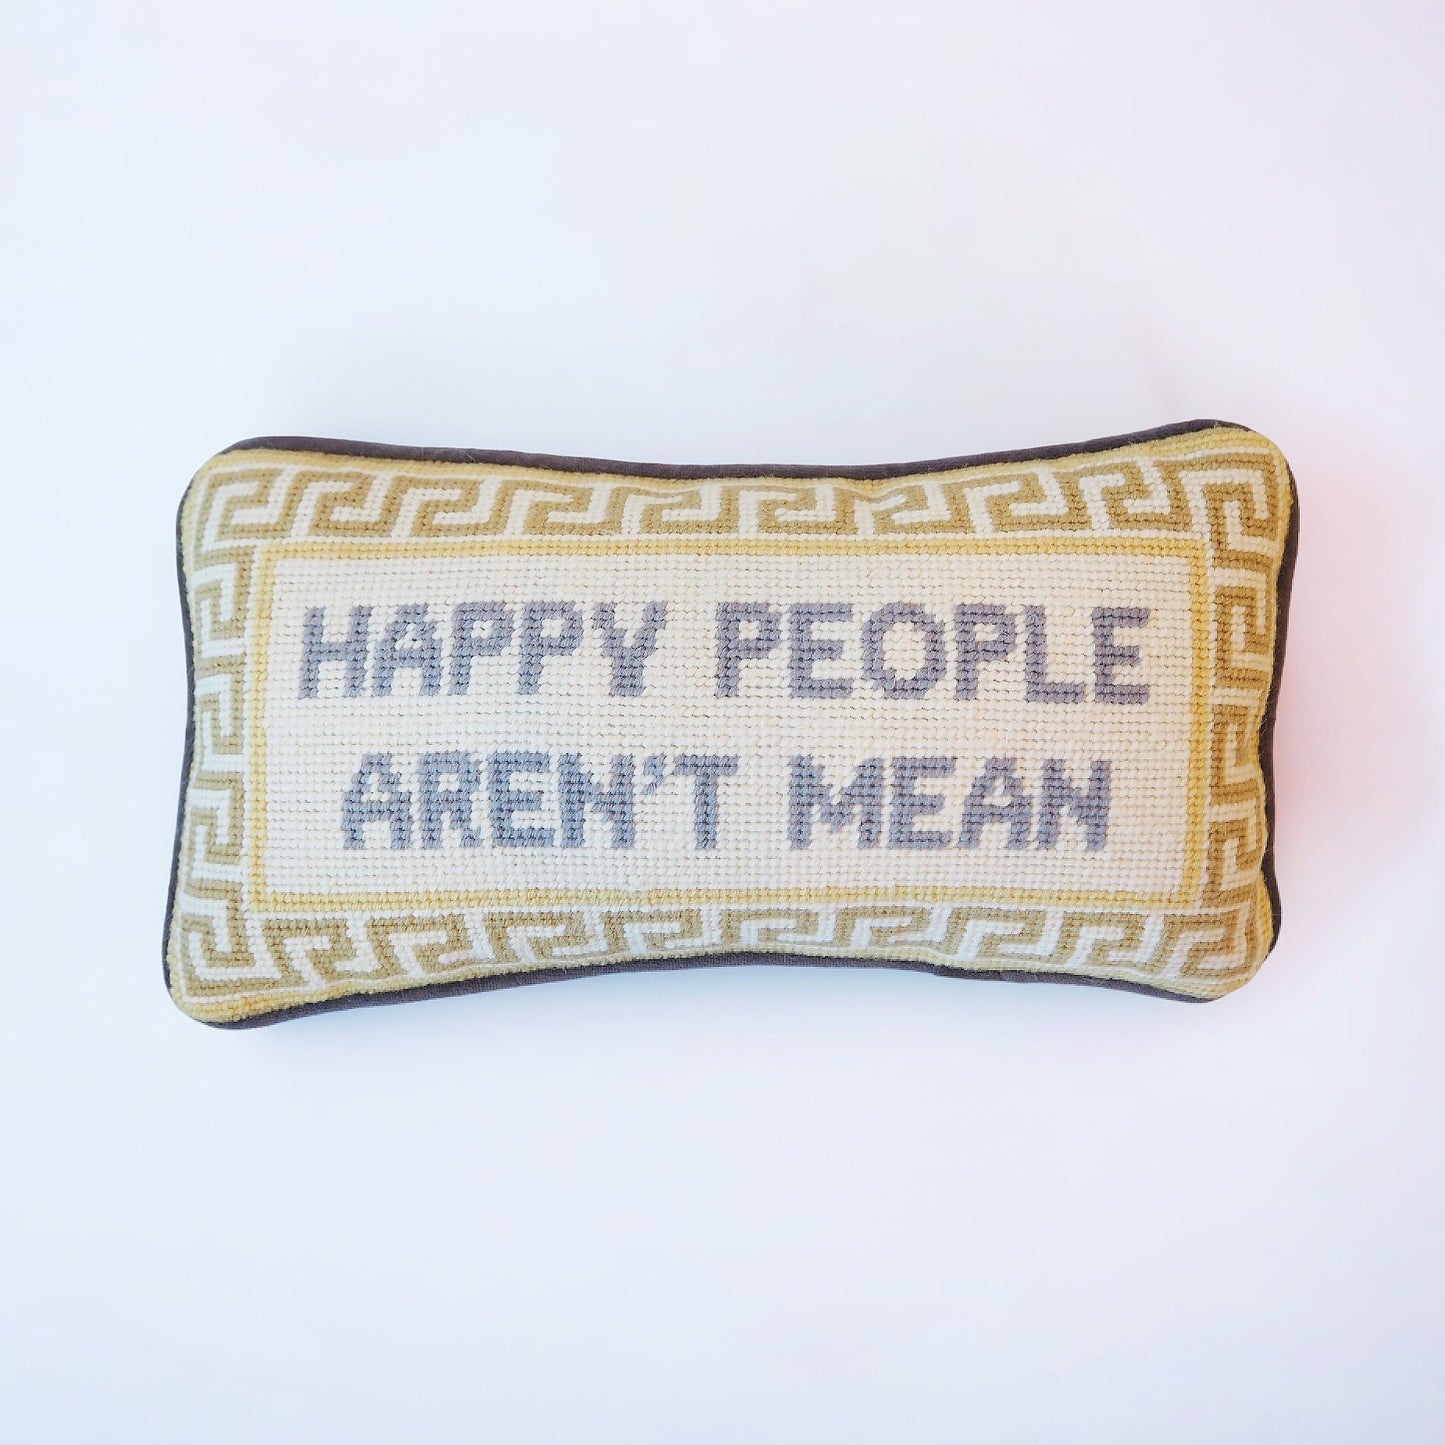 Girl Be Brave Happy People Aren't Mean Hooked Pillow